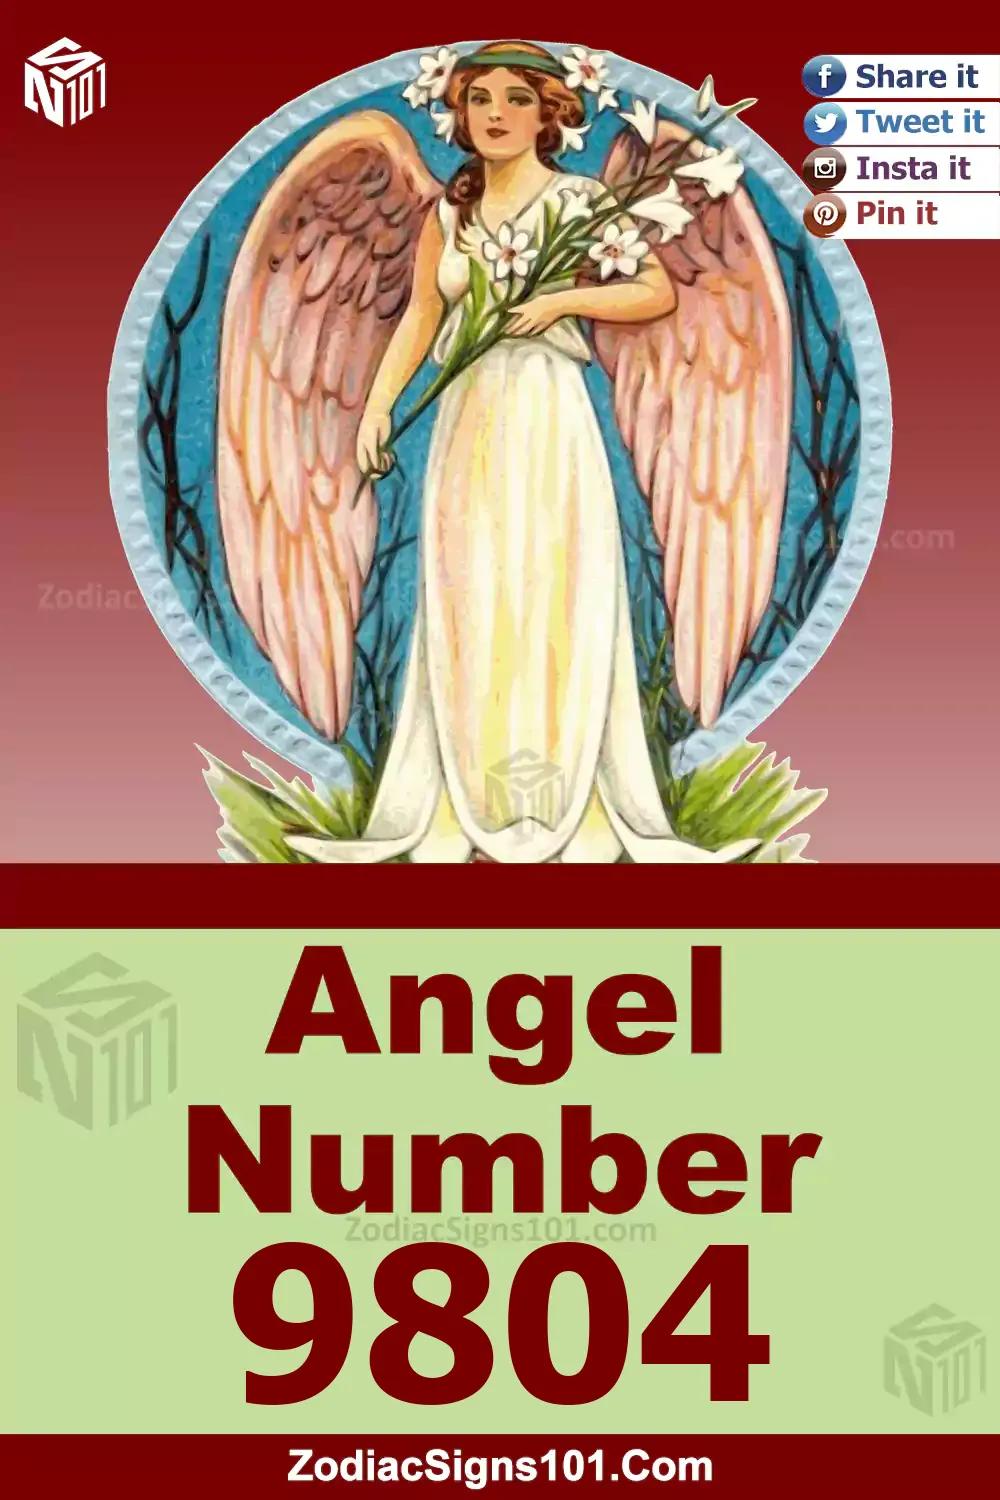 9804 Angel Number Meaning